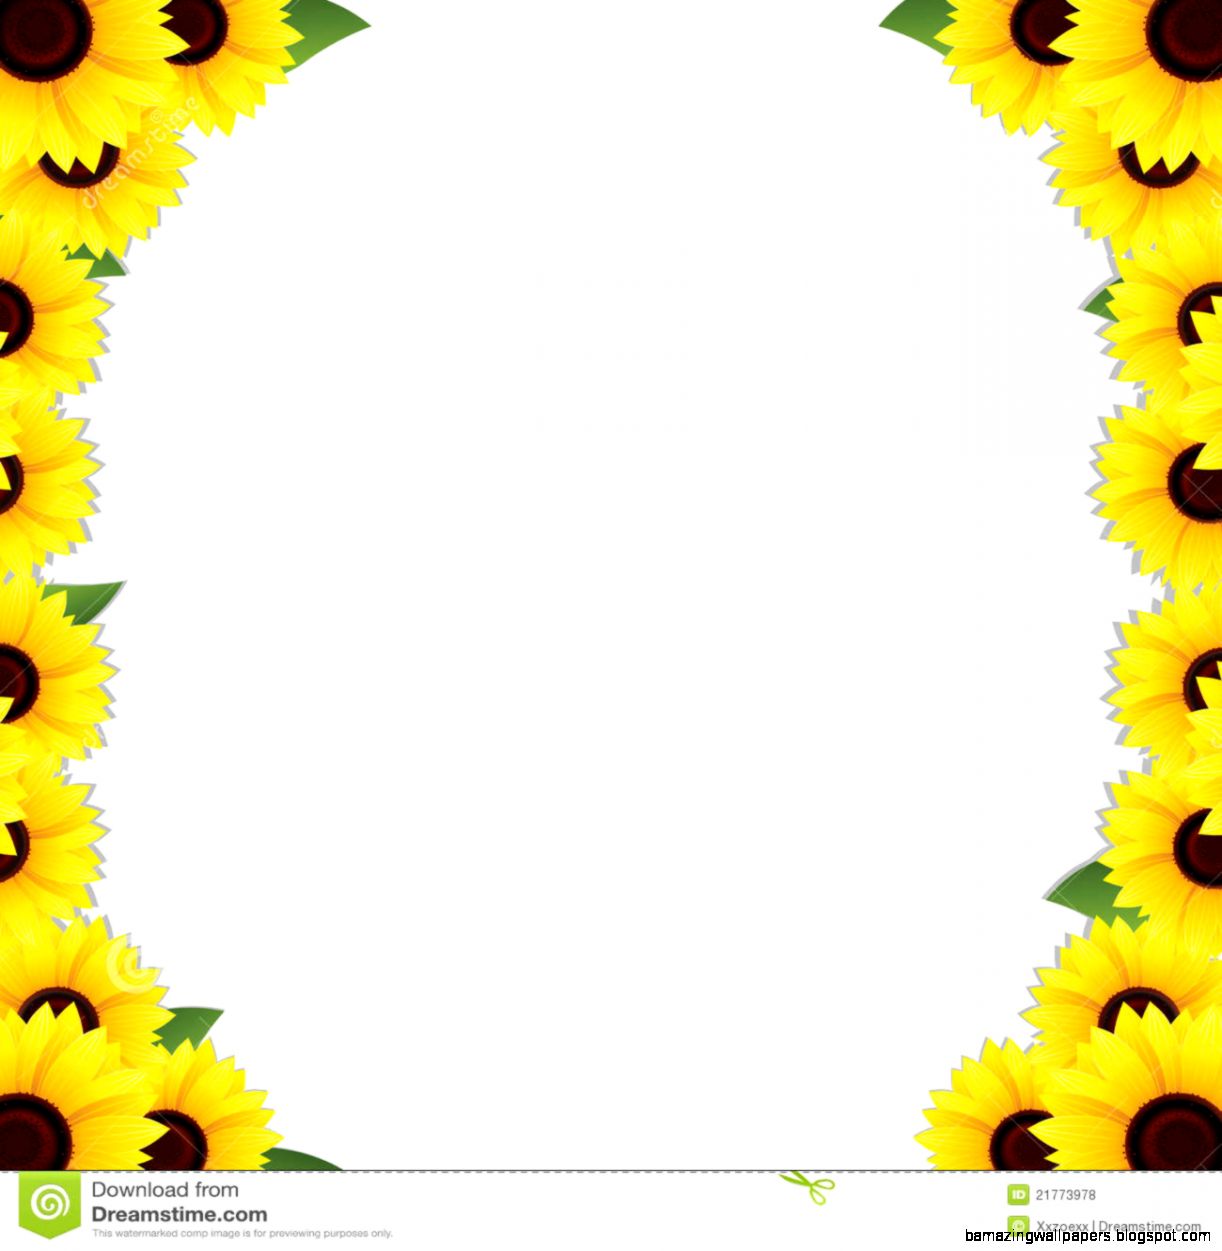 Download Sunflower Border Clipart | Amazing Wallpapers